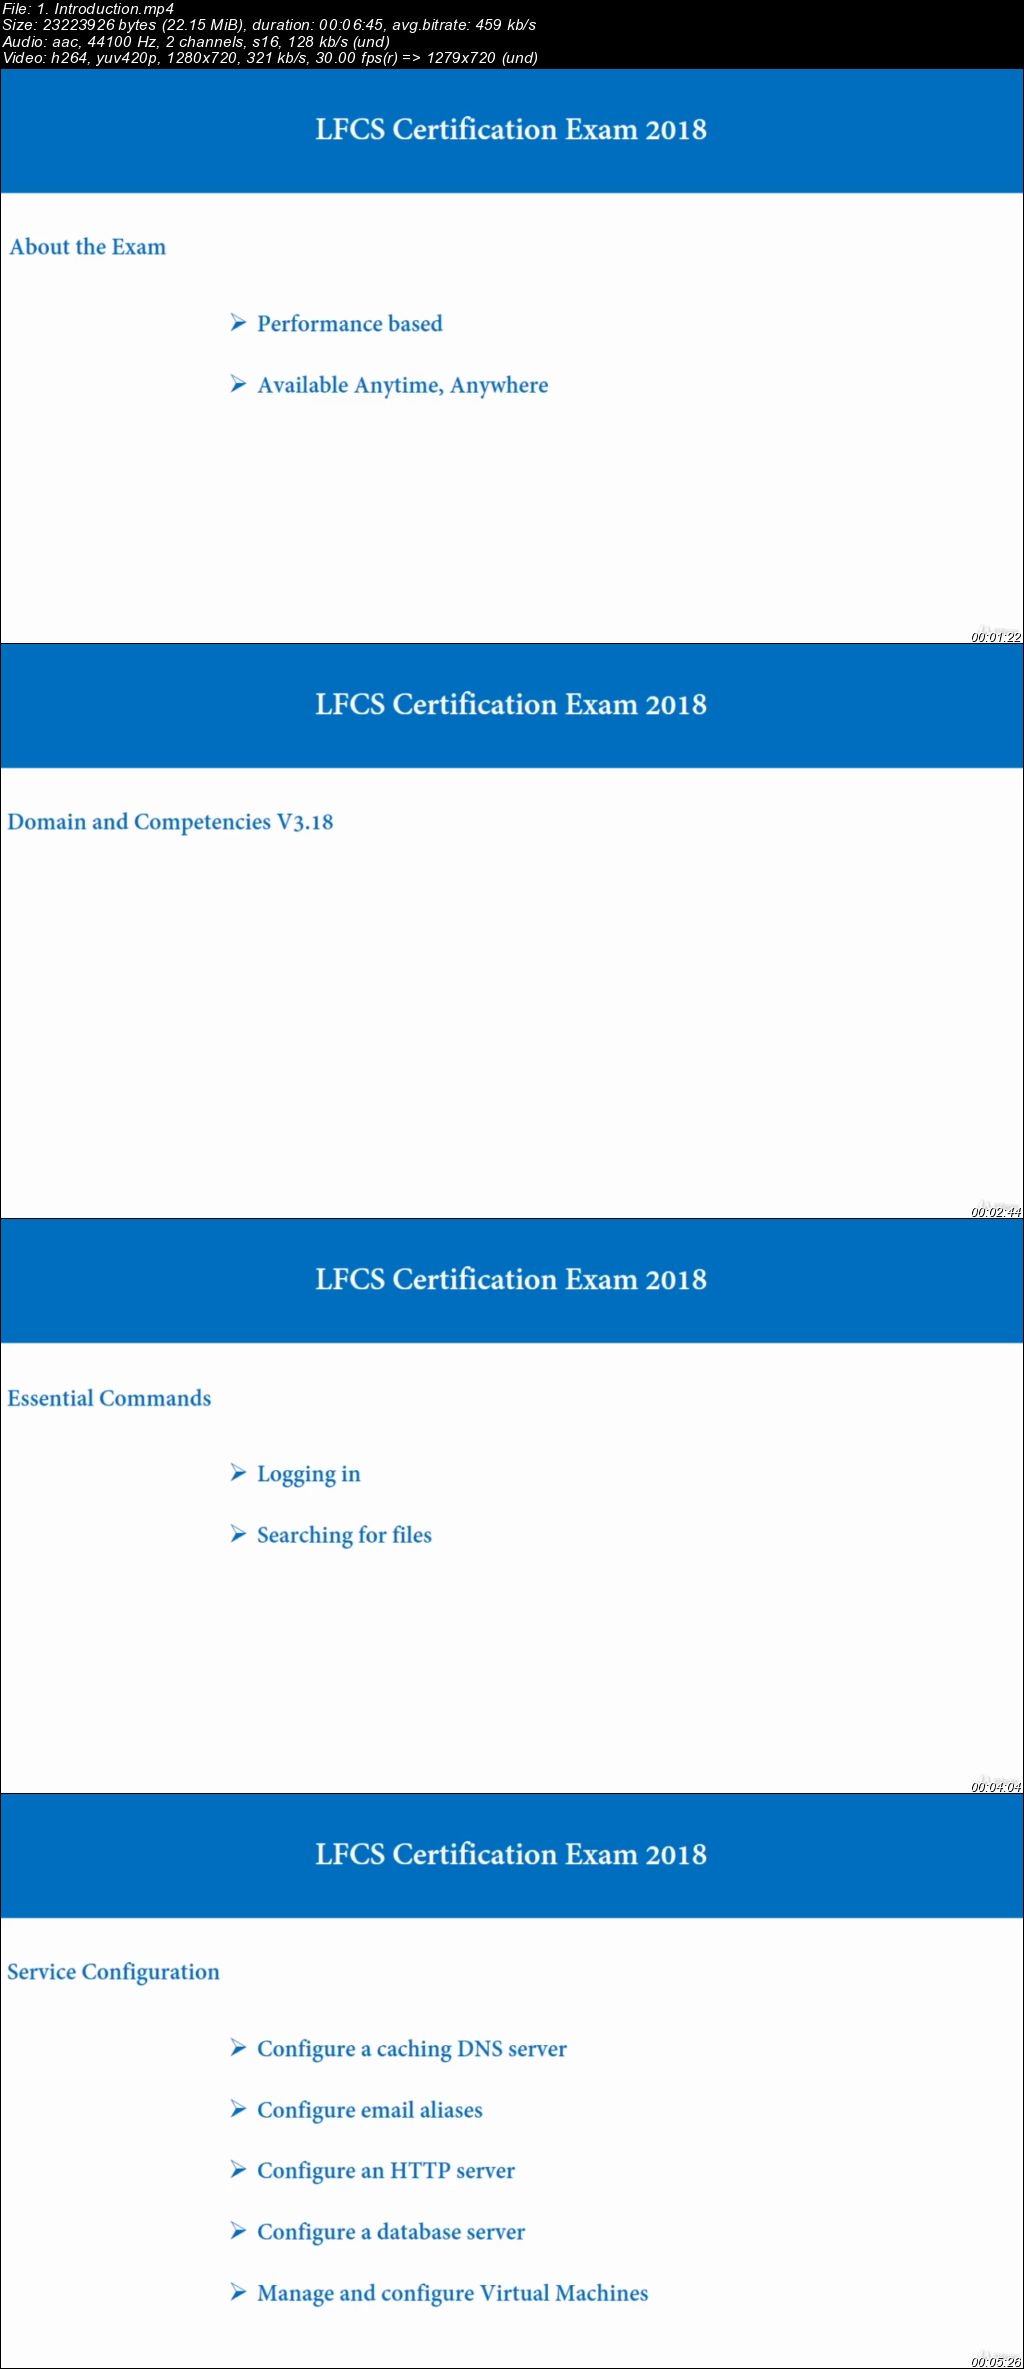  Linux Foundation (LFCS and LFCE) combined test prep 